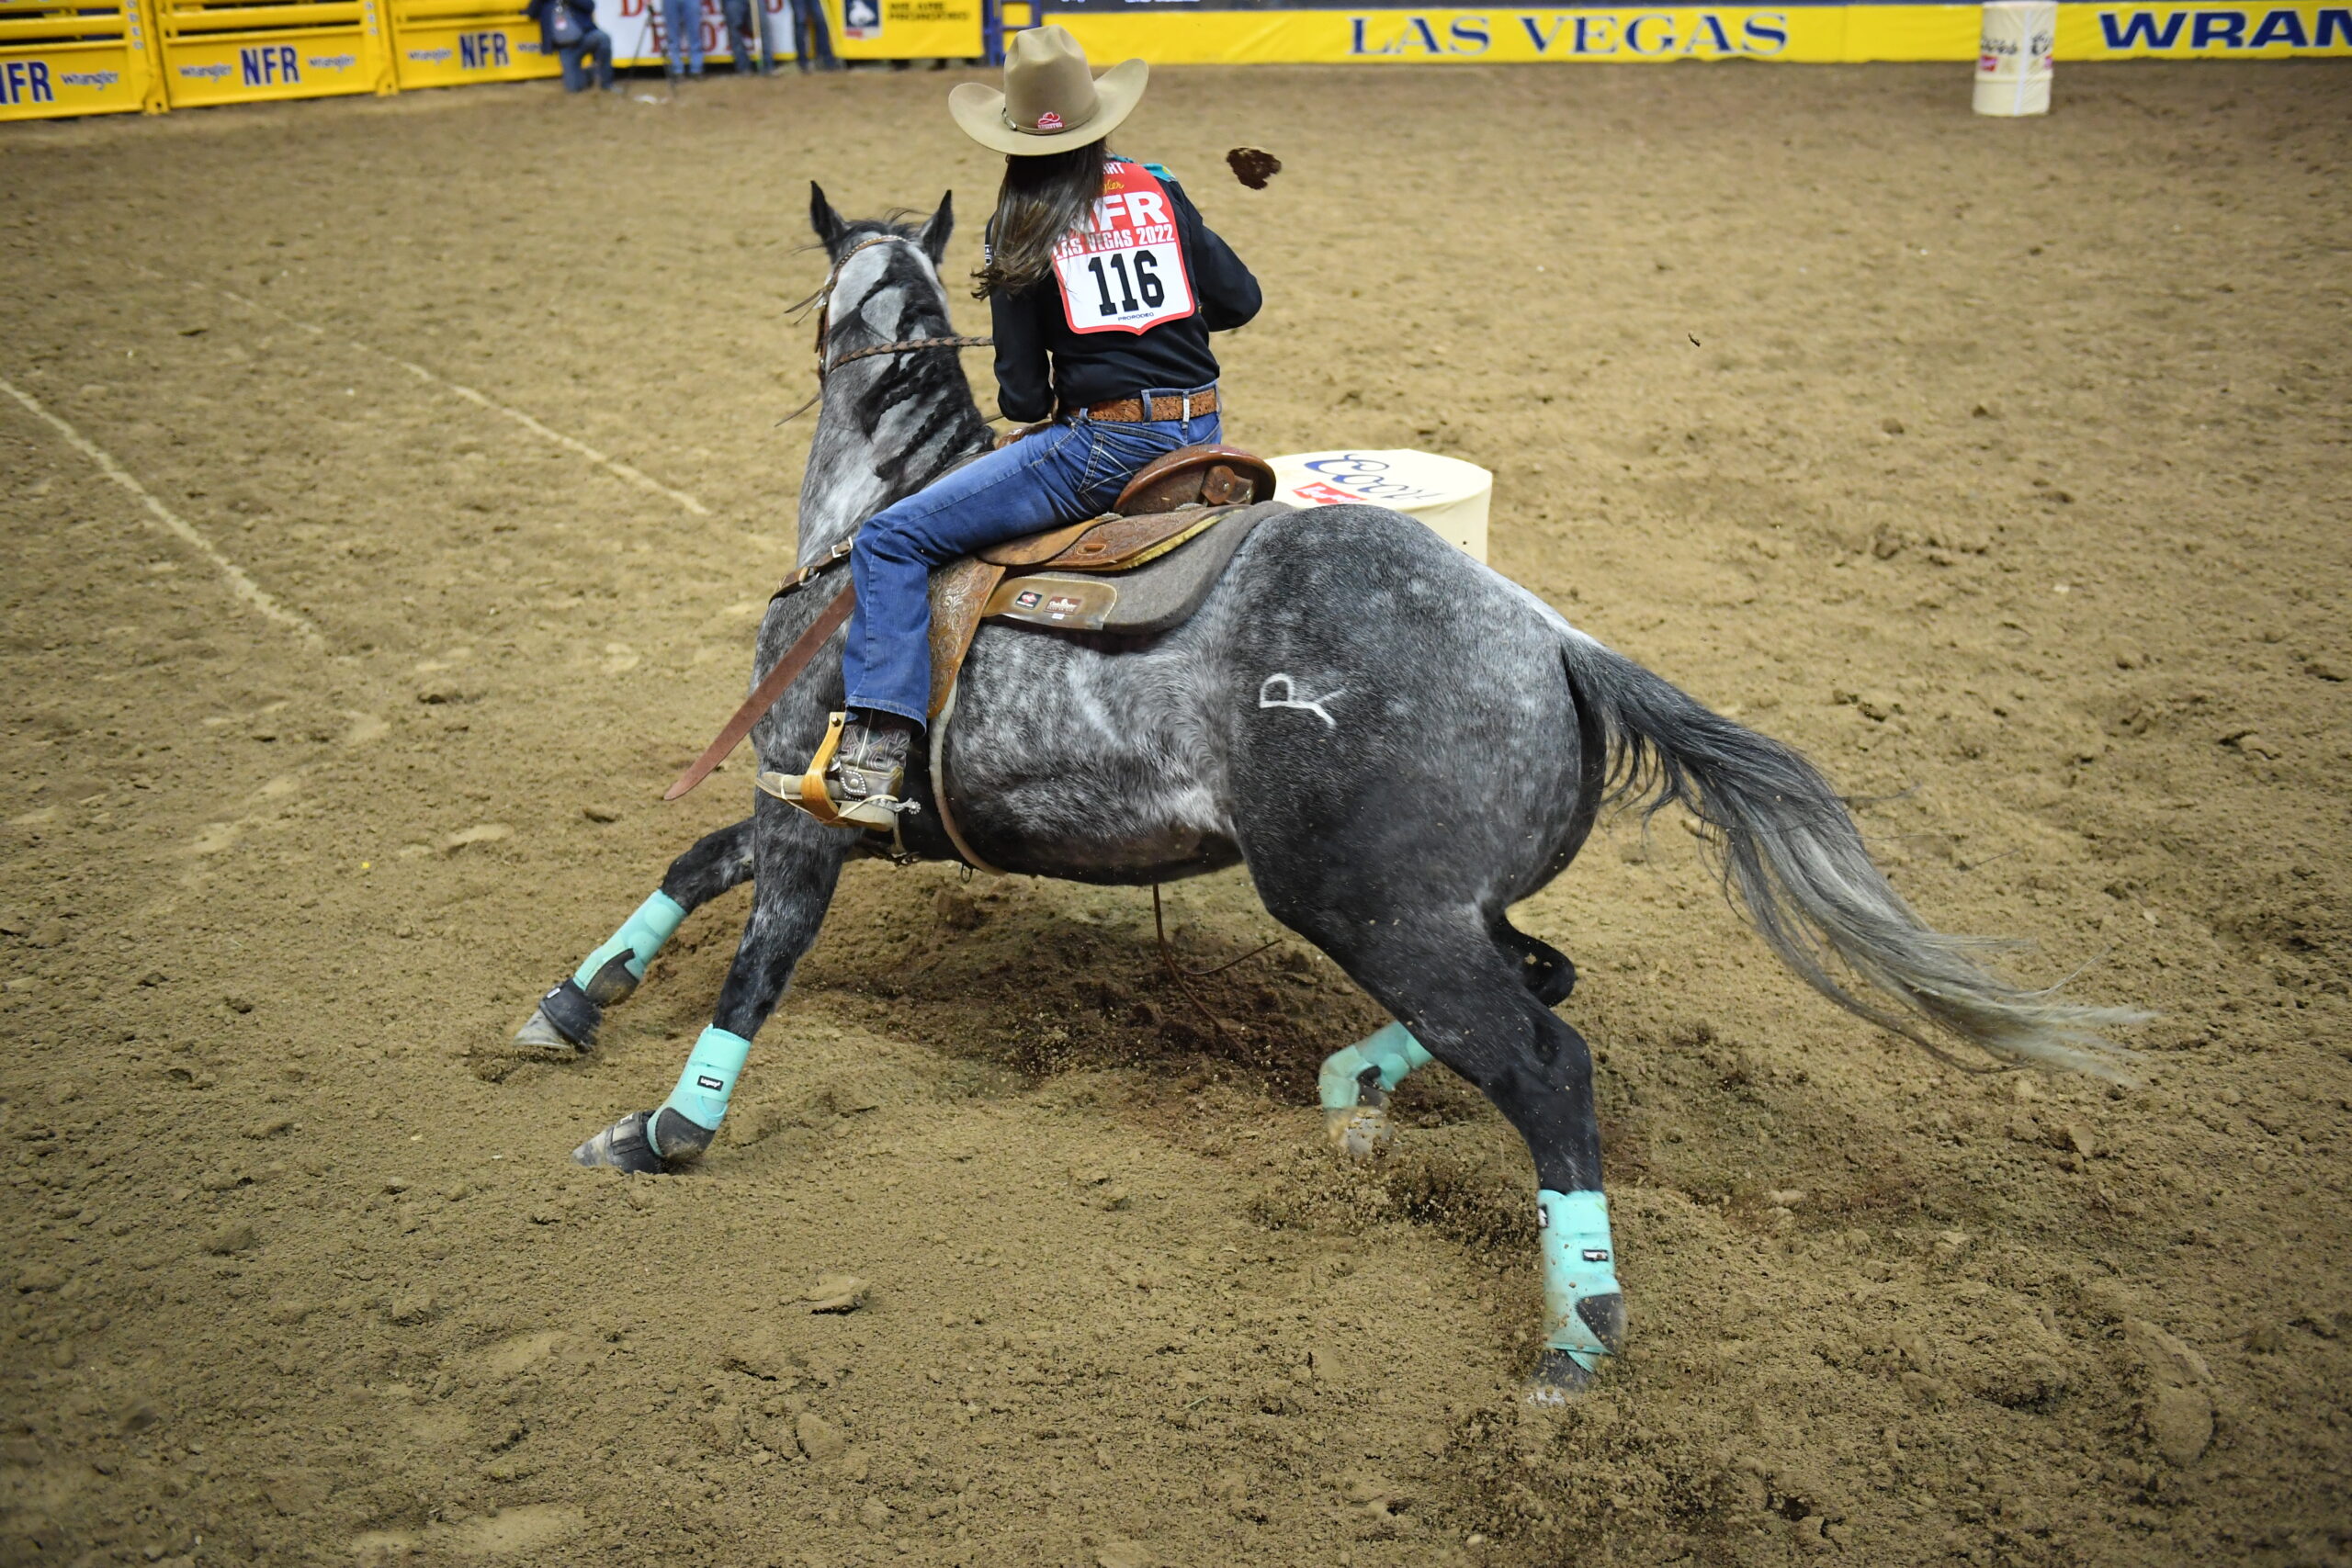 See the Full List of Barrel Racing Horses Running at the 2022 NFR